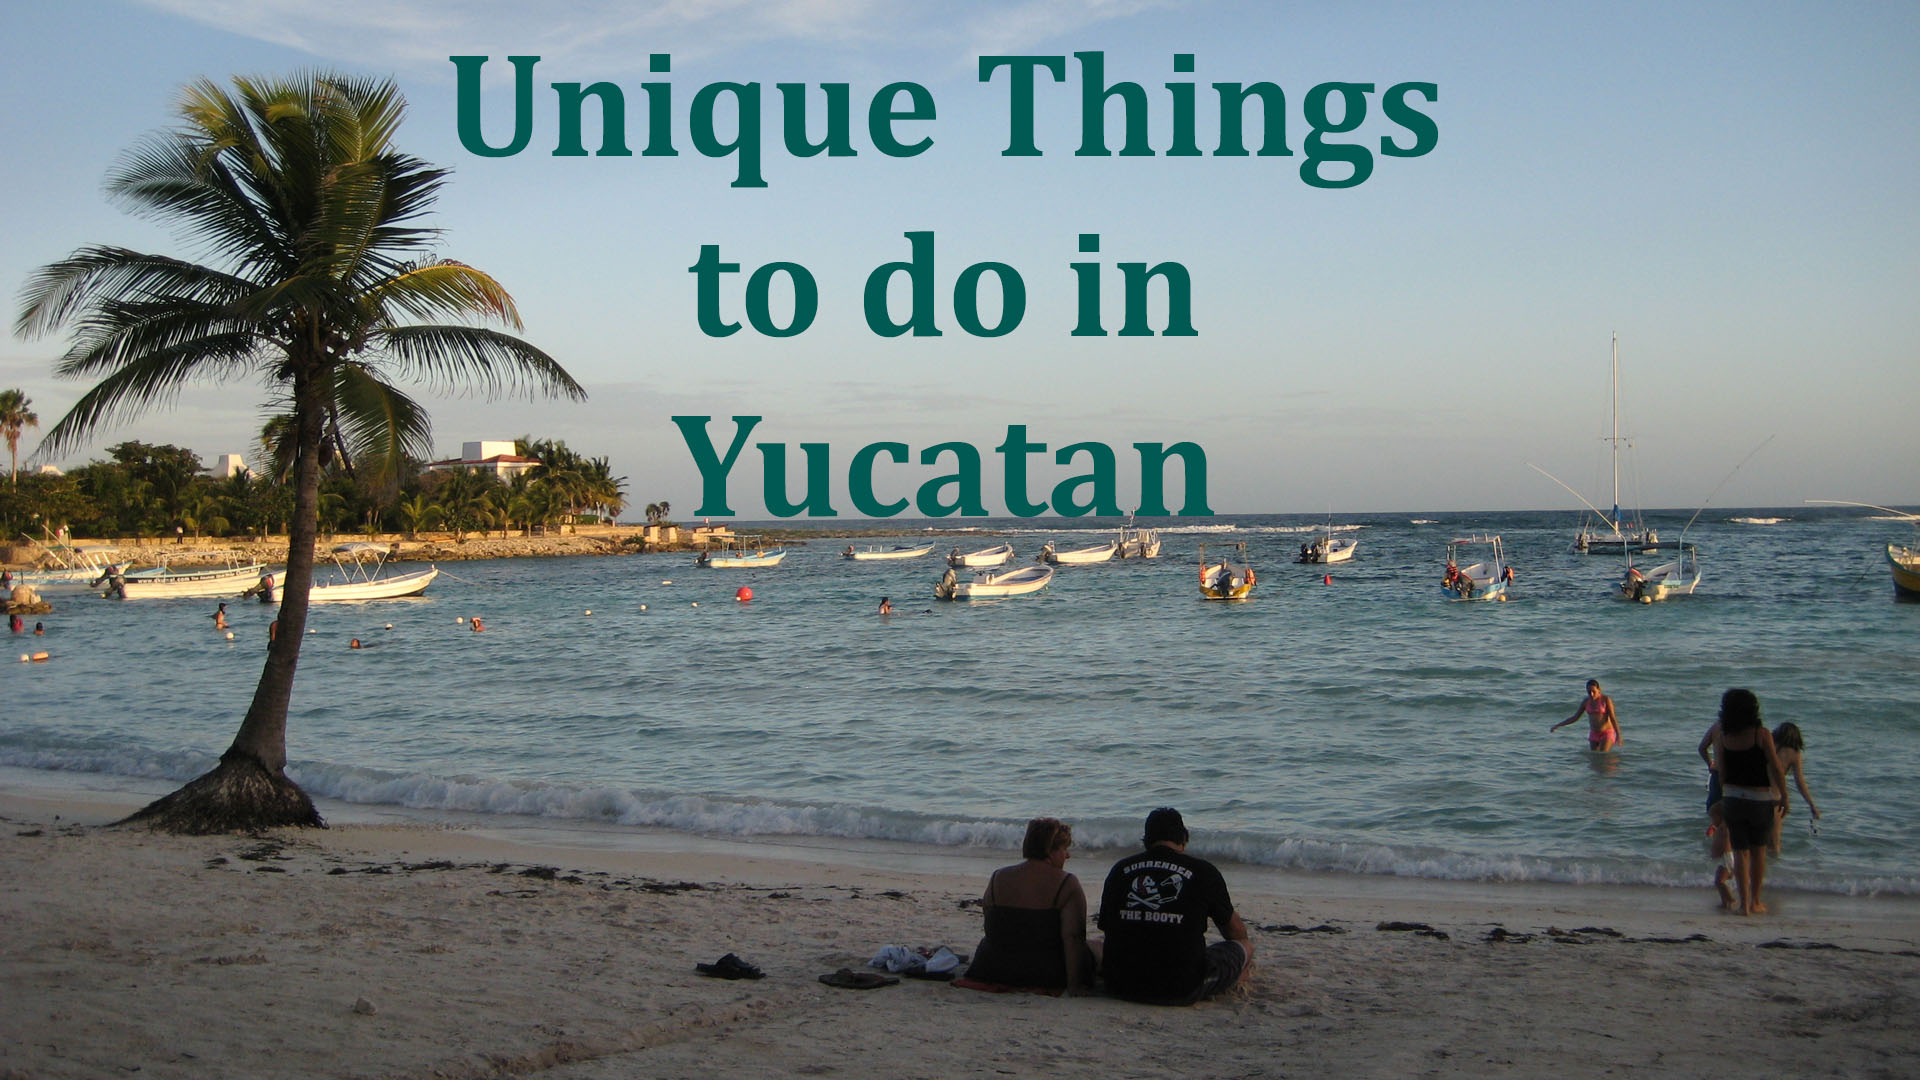 Unique Things To Do In Yucatan